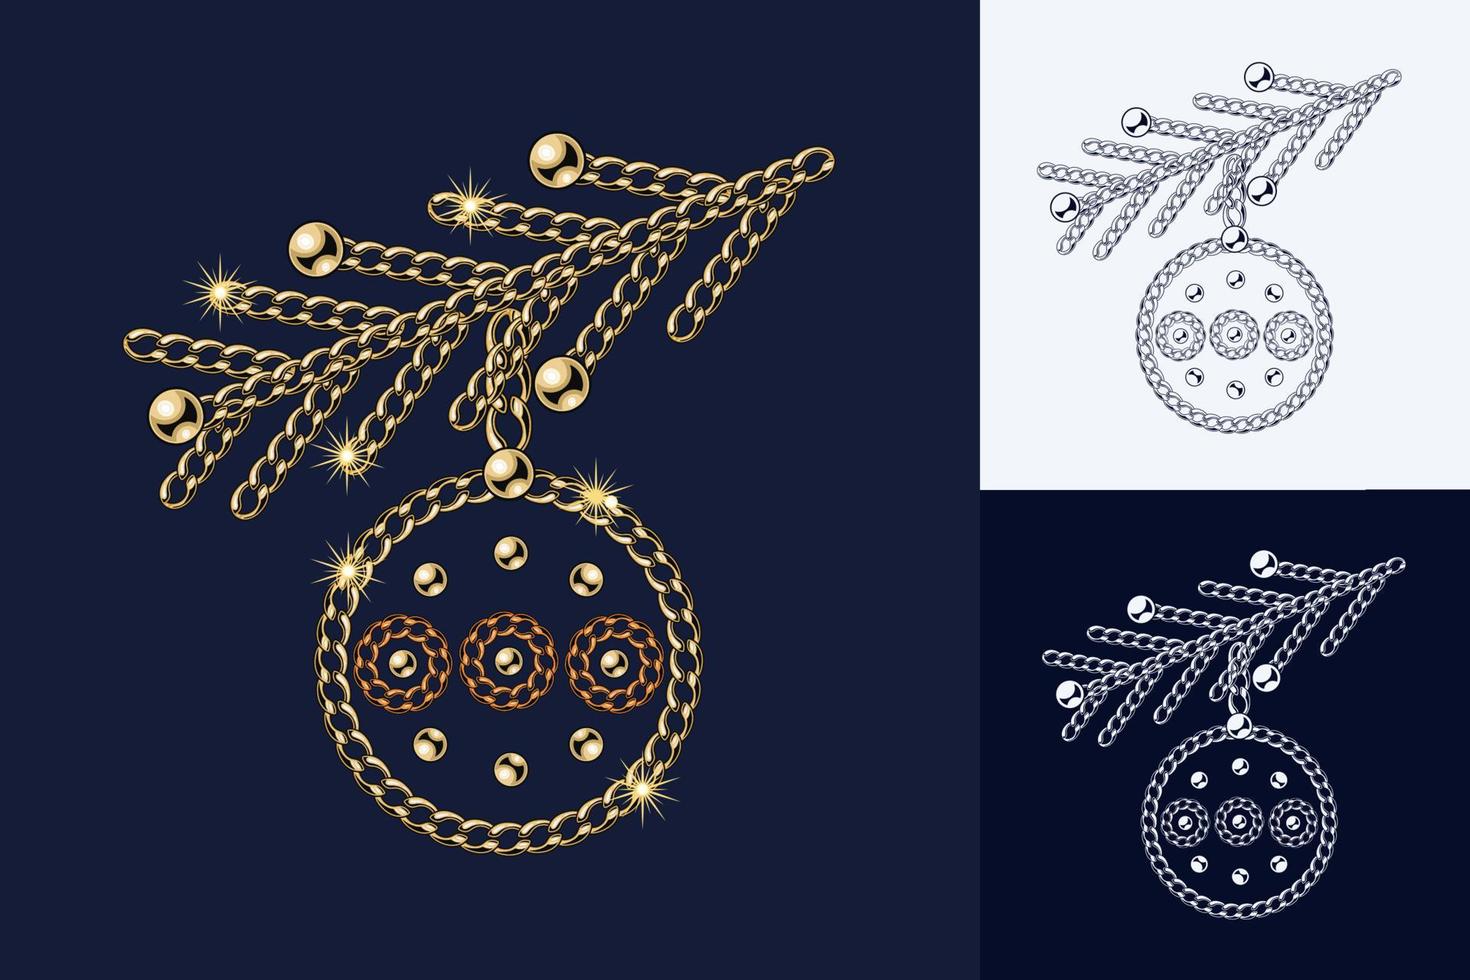 Christmas ball on tree branch made of jewelry gold chains, shiny ball beads Elegant jewelry illustration for winter sales, Xmas, new year holiday, gift decoration. Monochrome black and white version vector